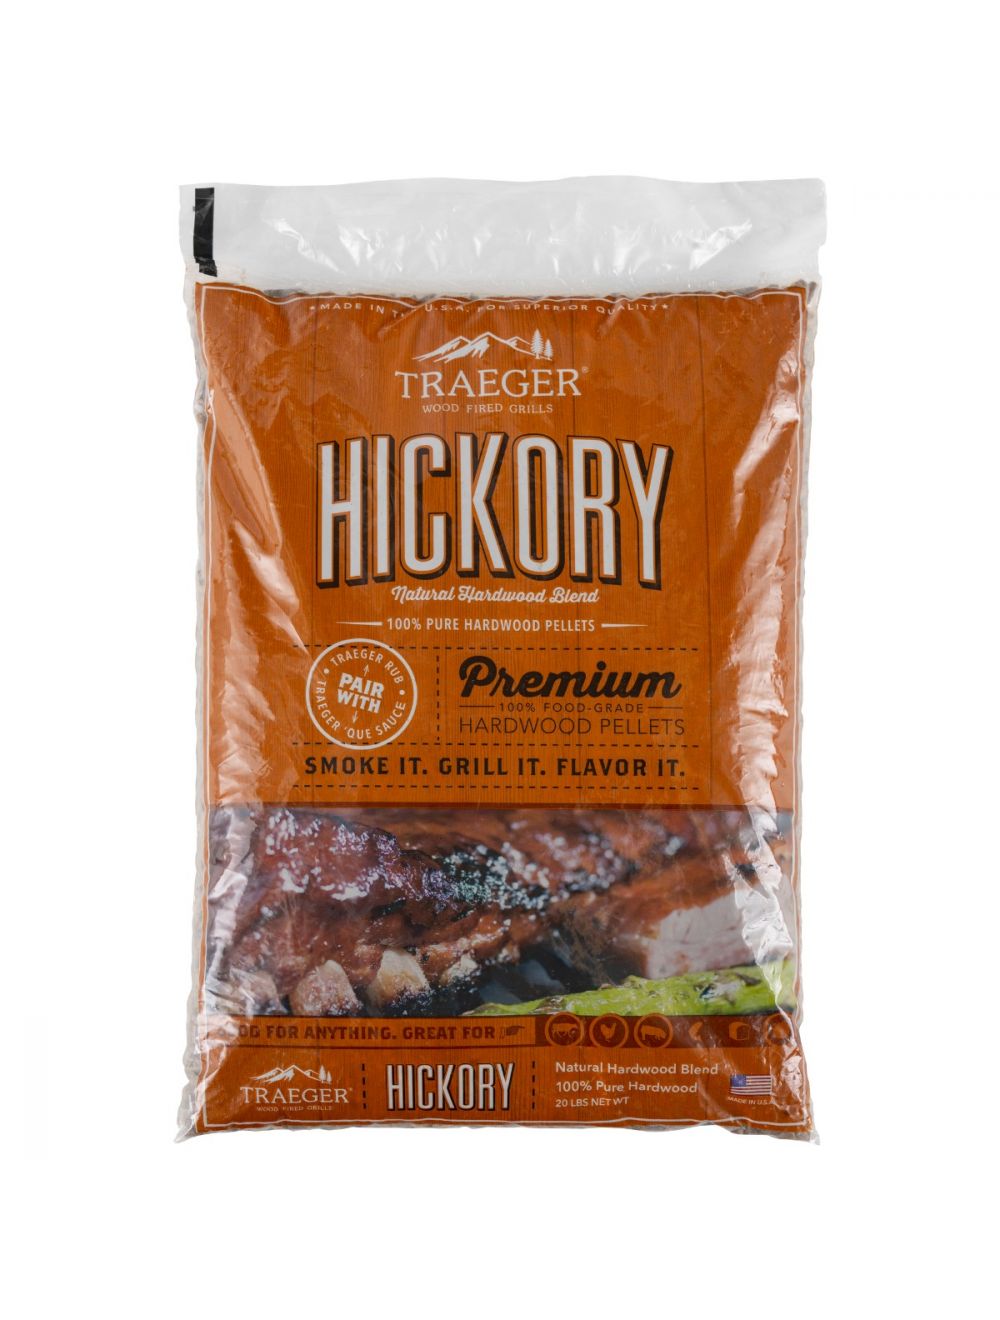 Traeger Hickory Hardwood Grill Smoker Pellets Barbecue Rich Natural Flavor 20 lb 